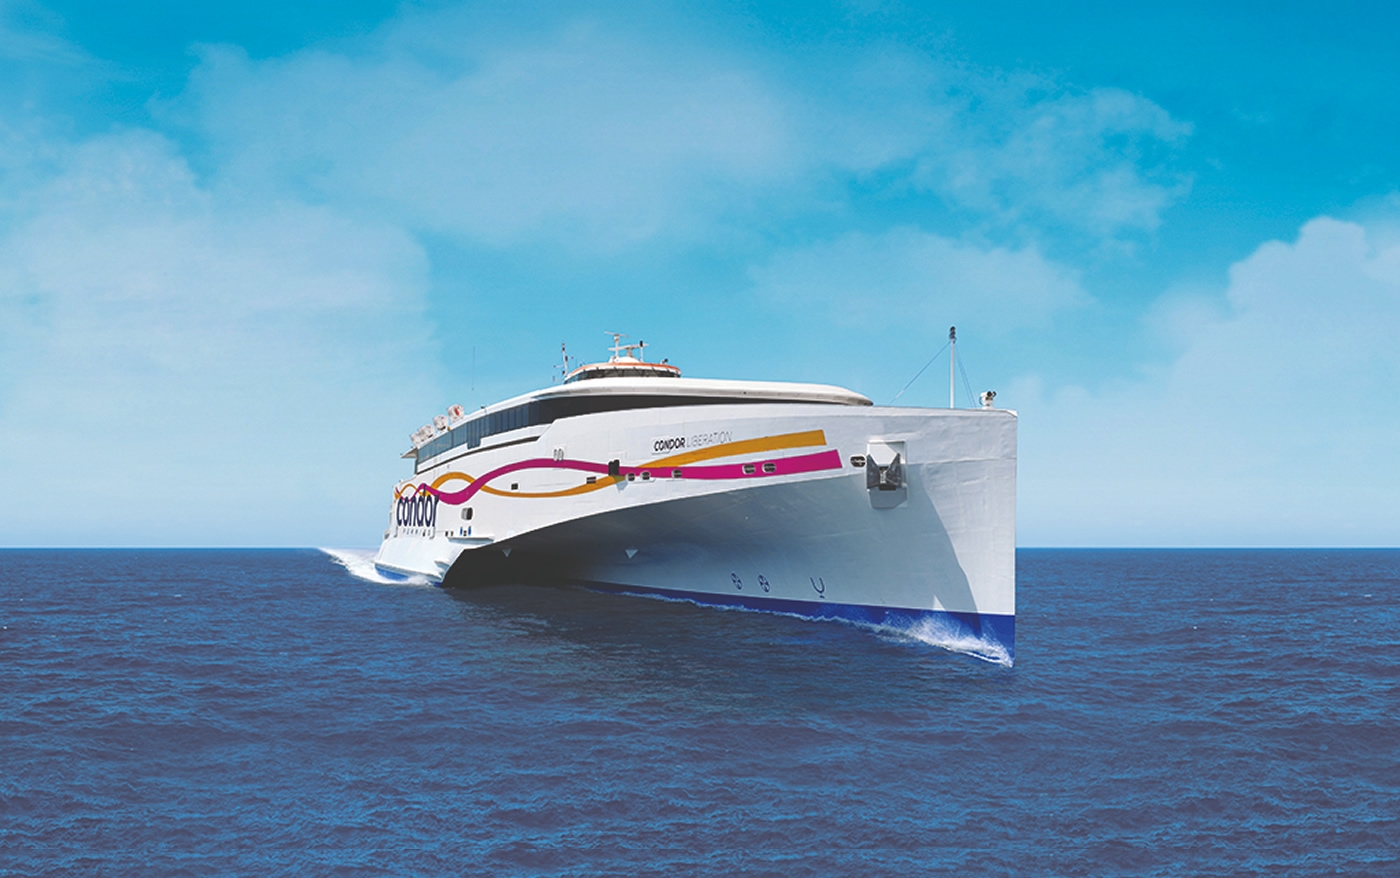 Travel to Jersey with Condor Ferries